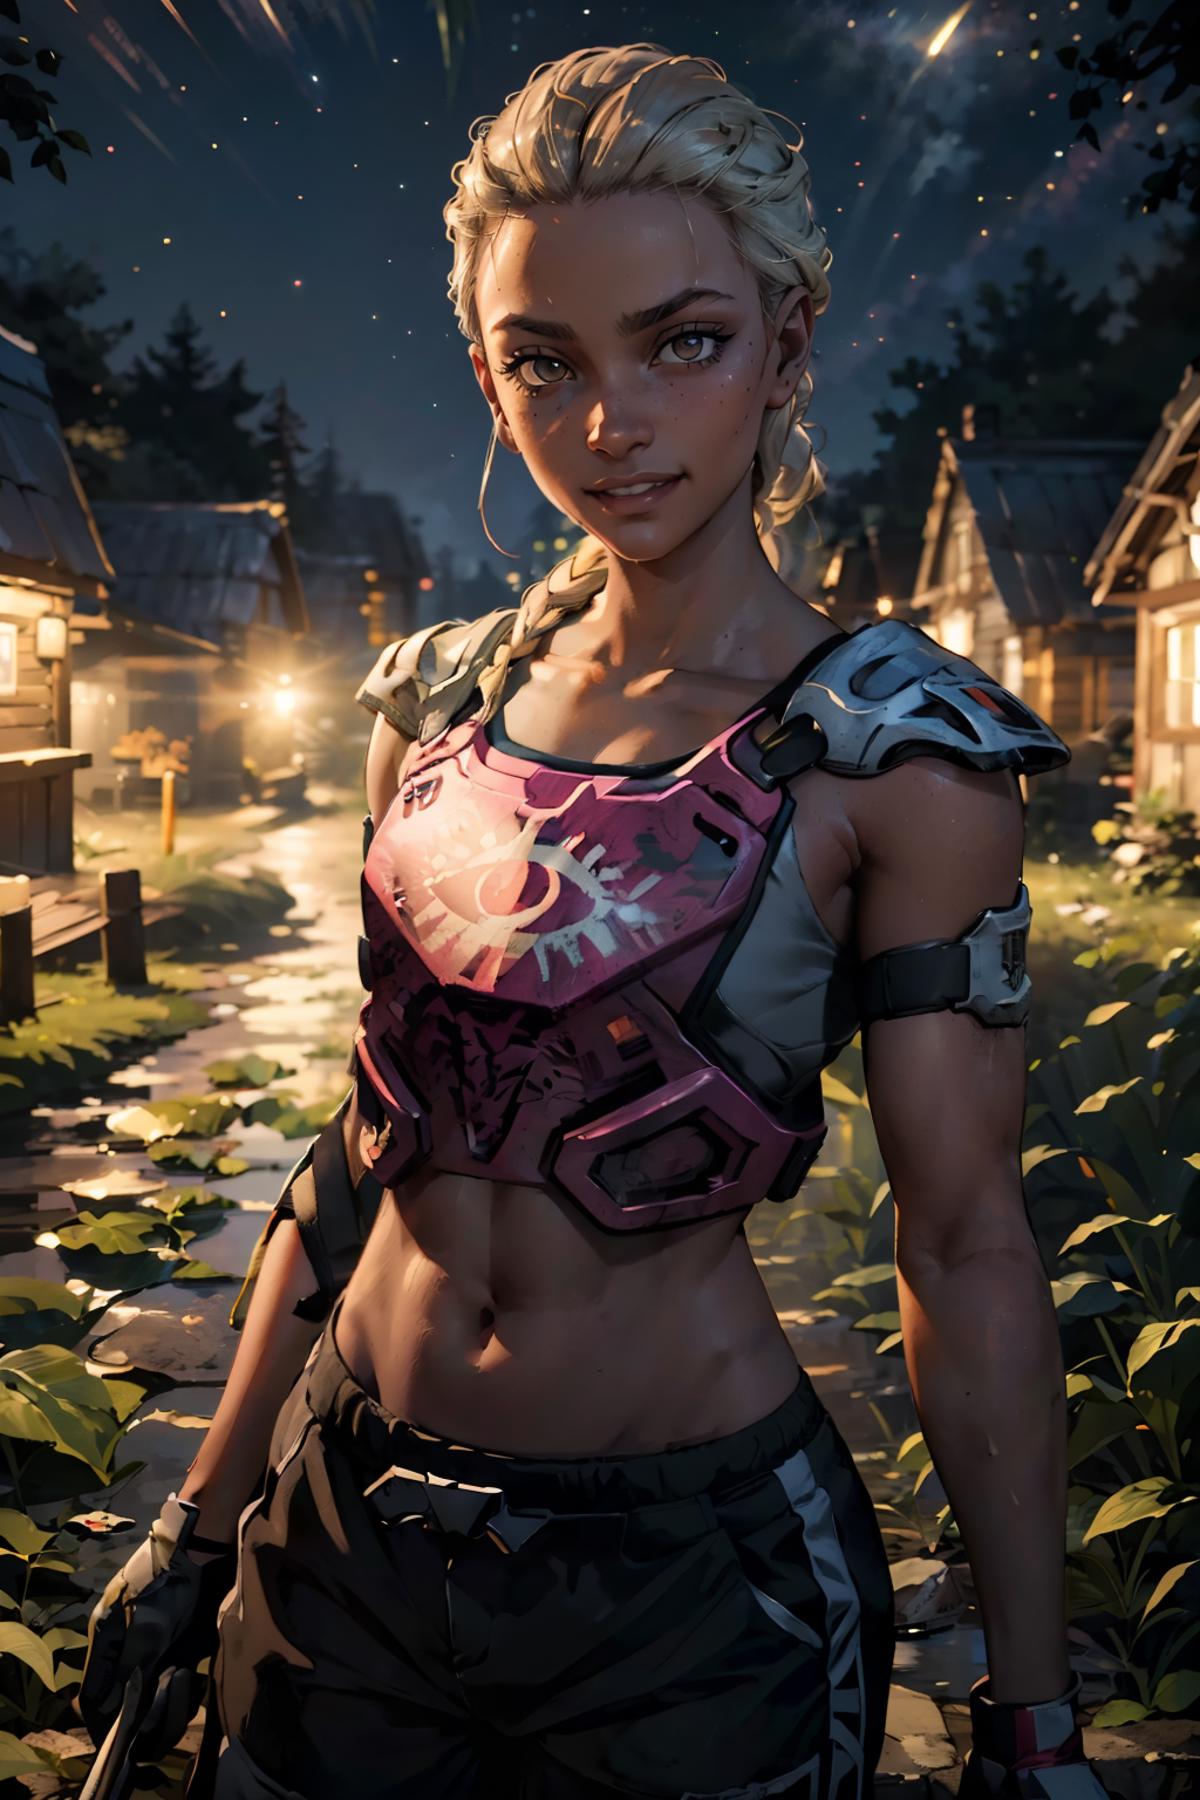 Lou from Far Cry New Dawn image by wikkitikki